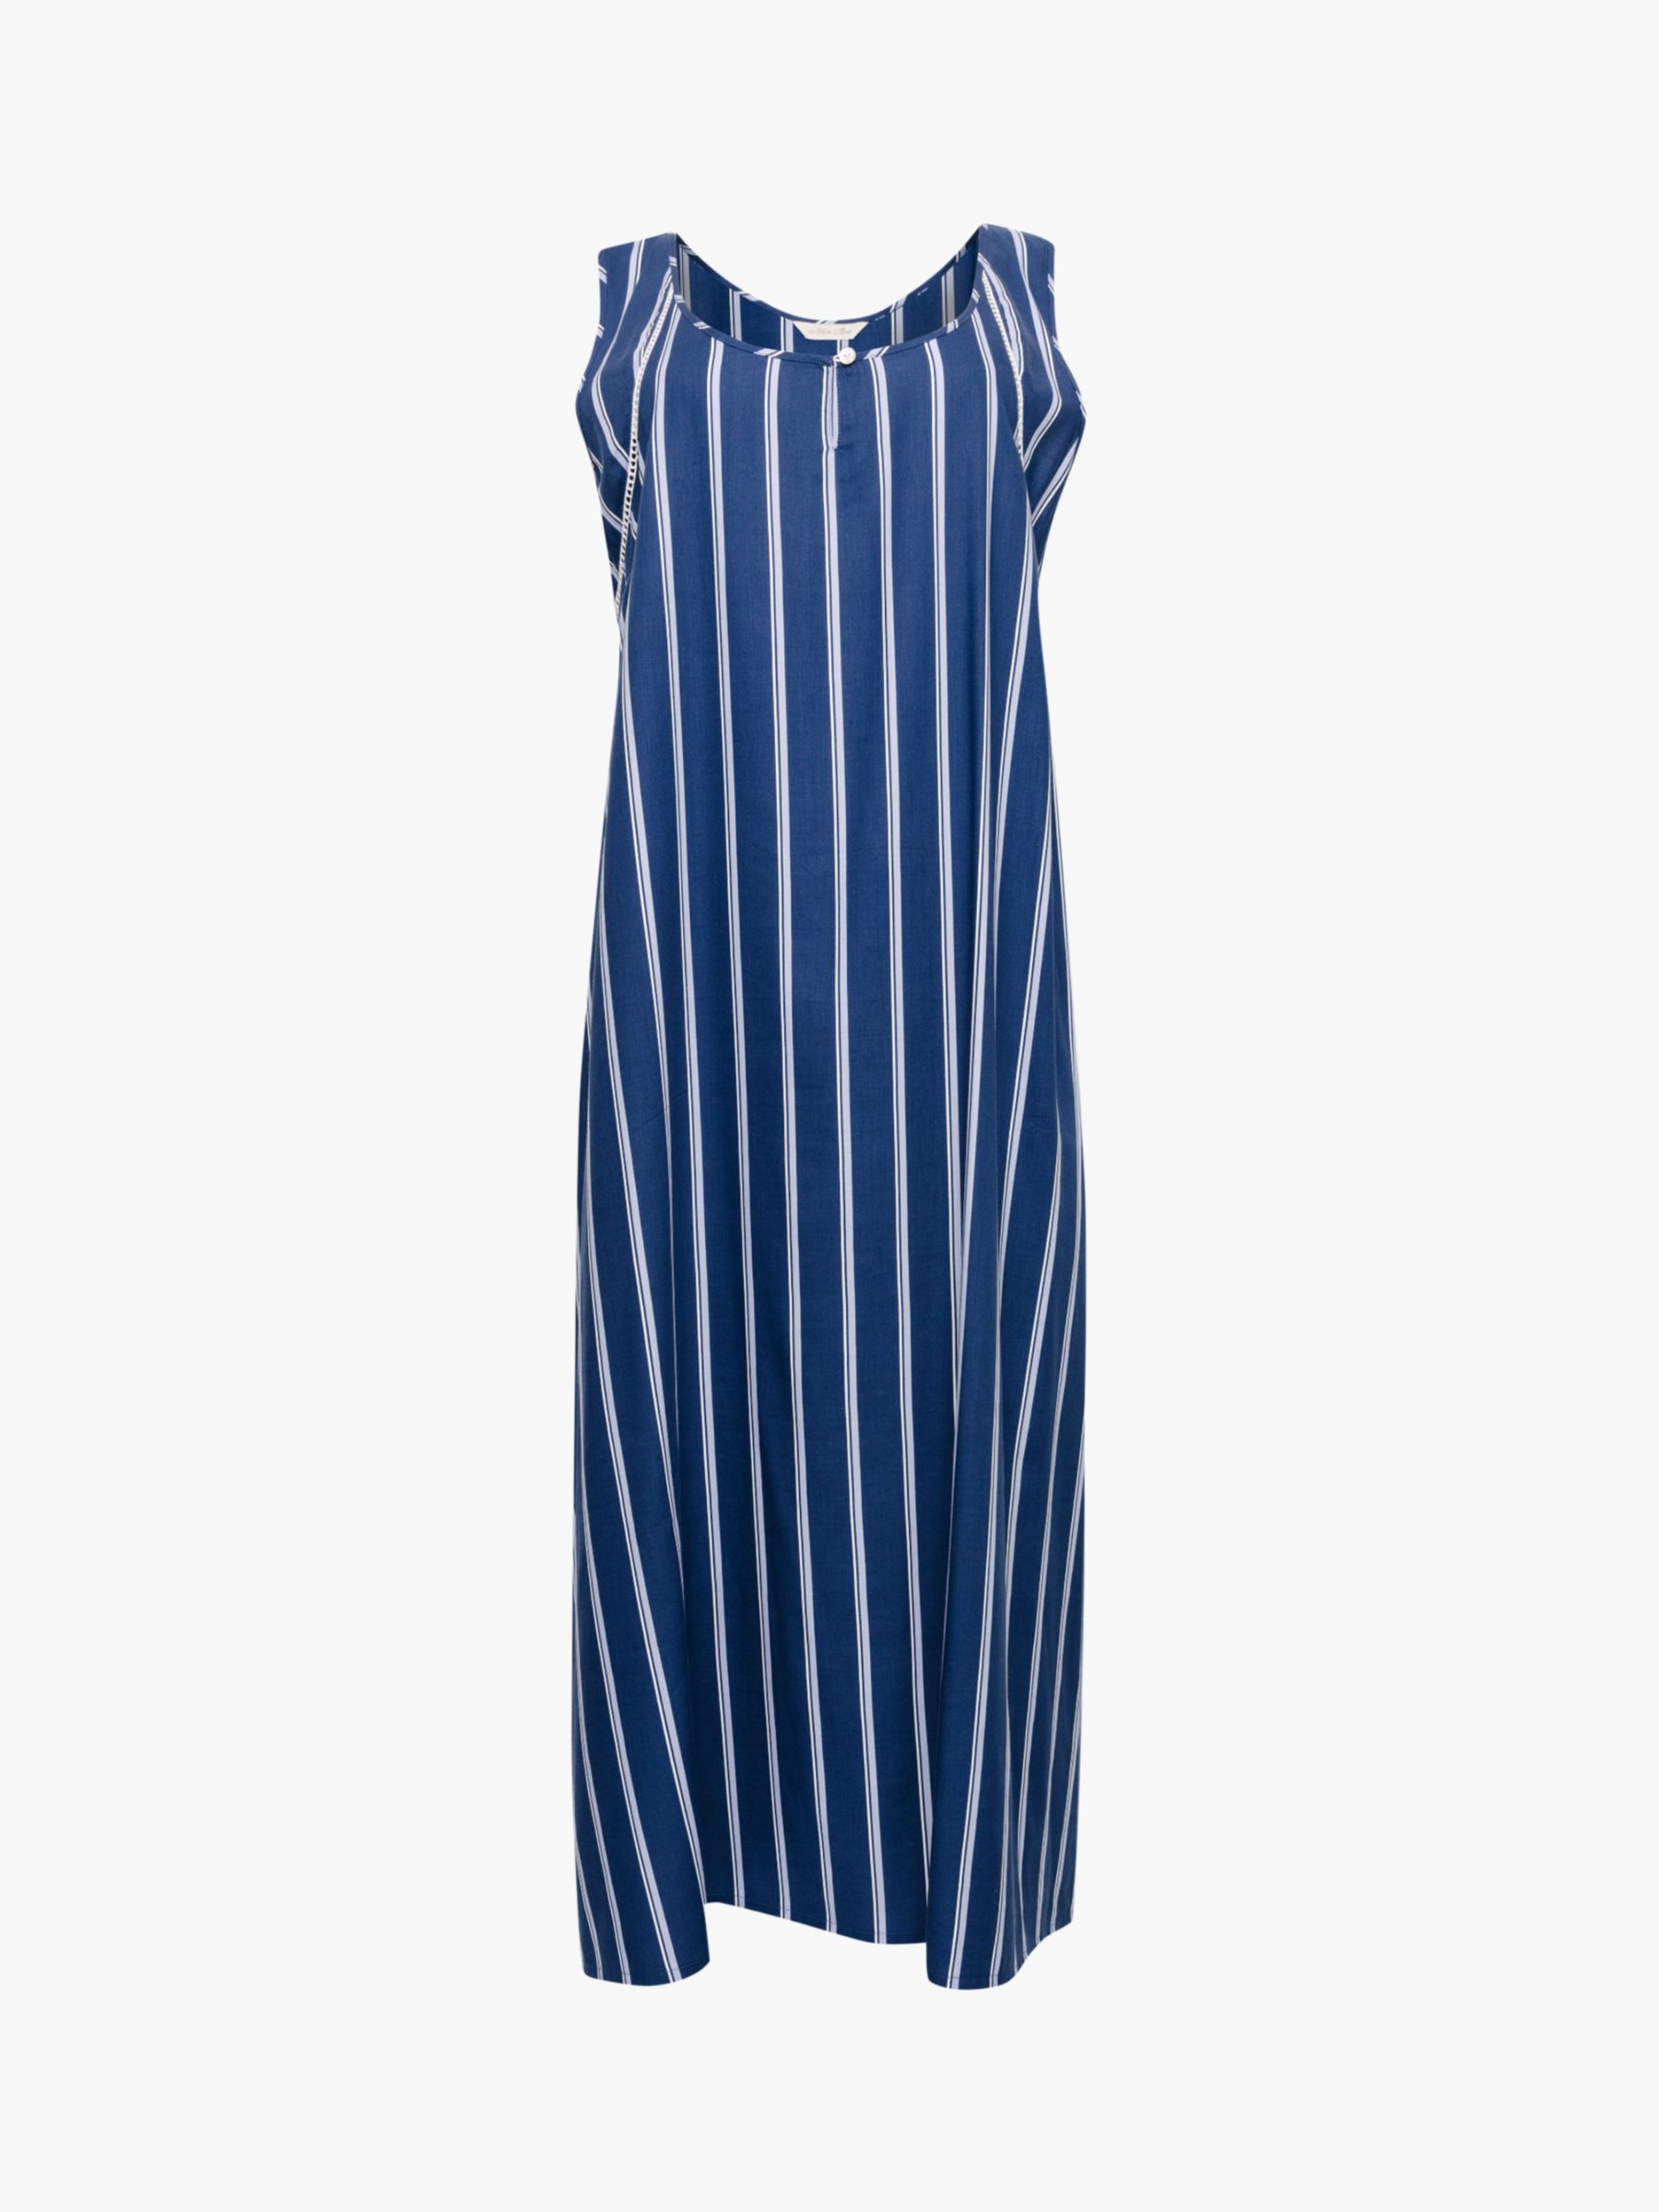 Buy Nora Rose by Cyberjammies Evette Striped Long Nightdress, Blue Online at johnlewis.com